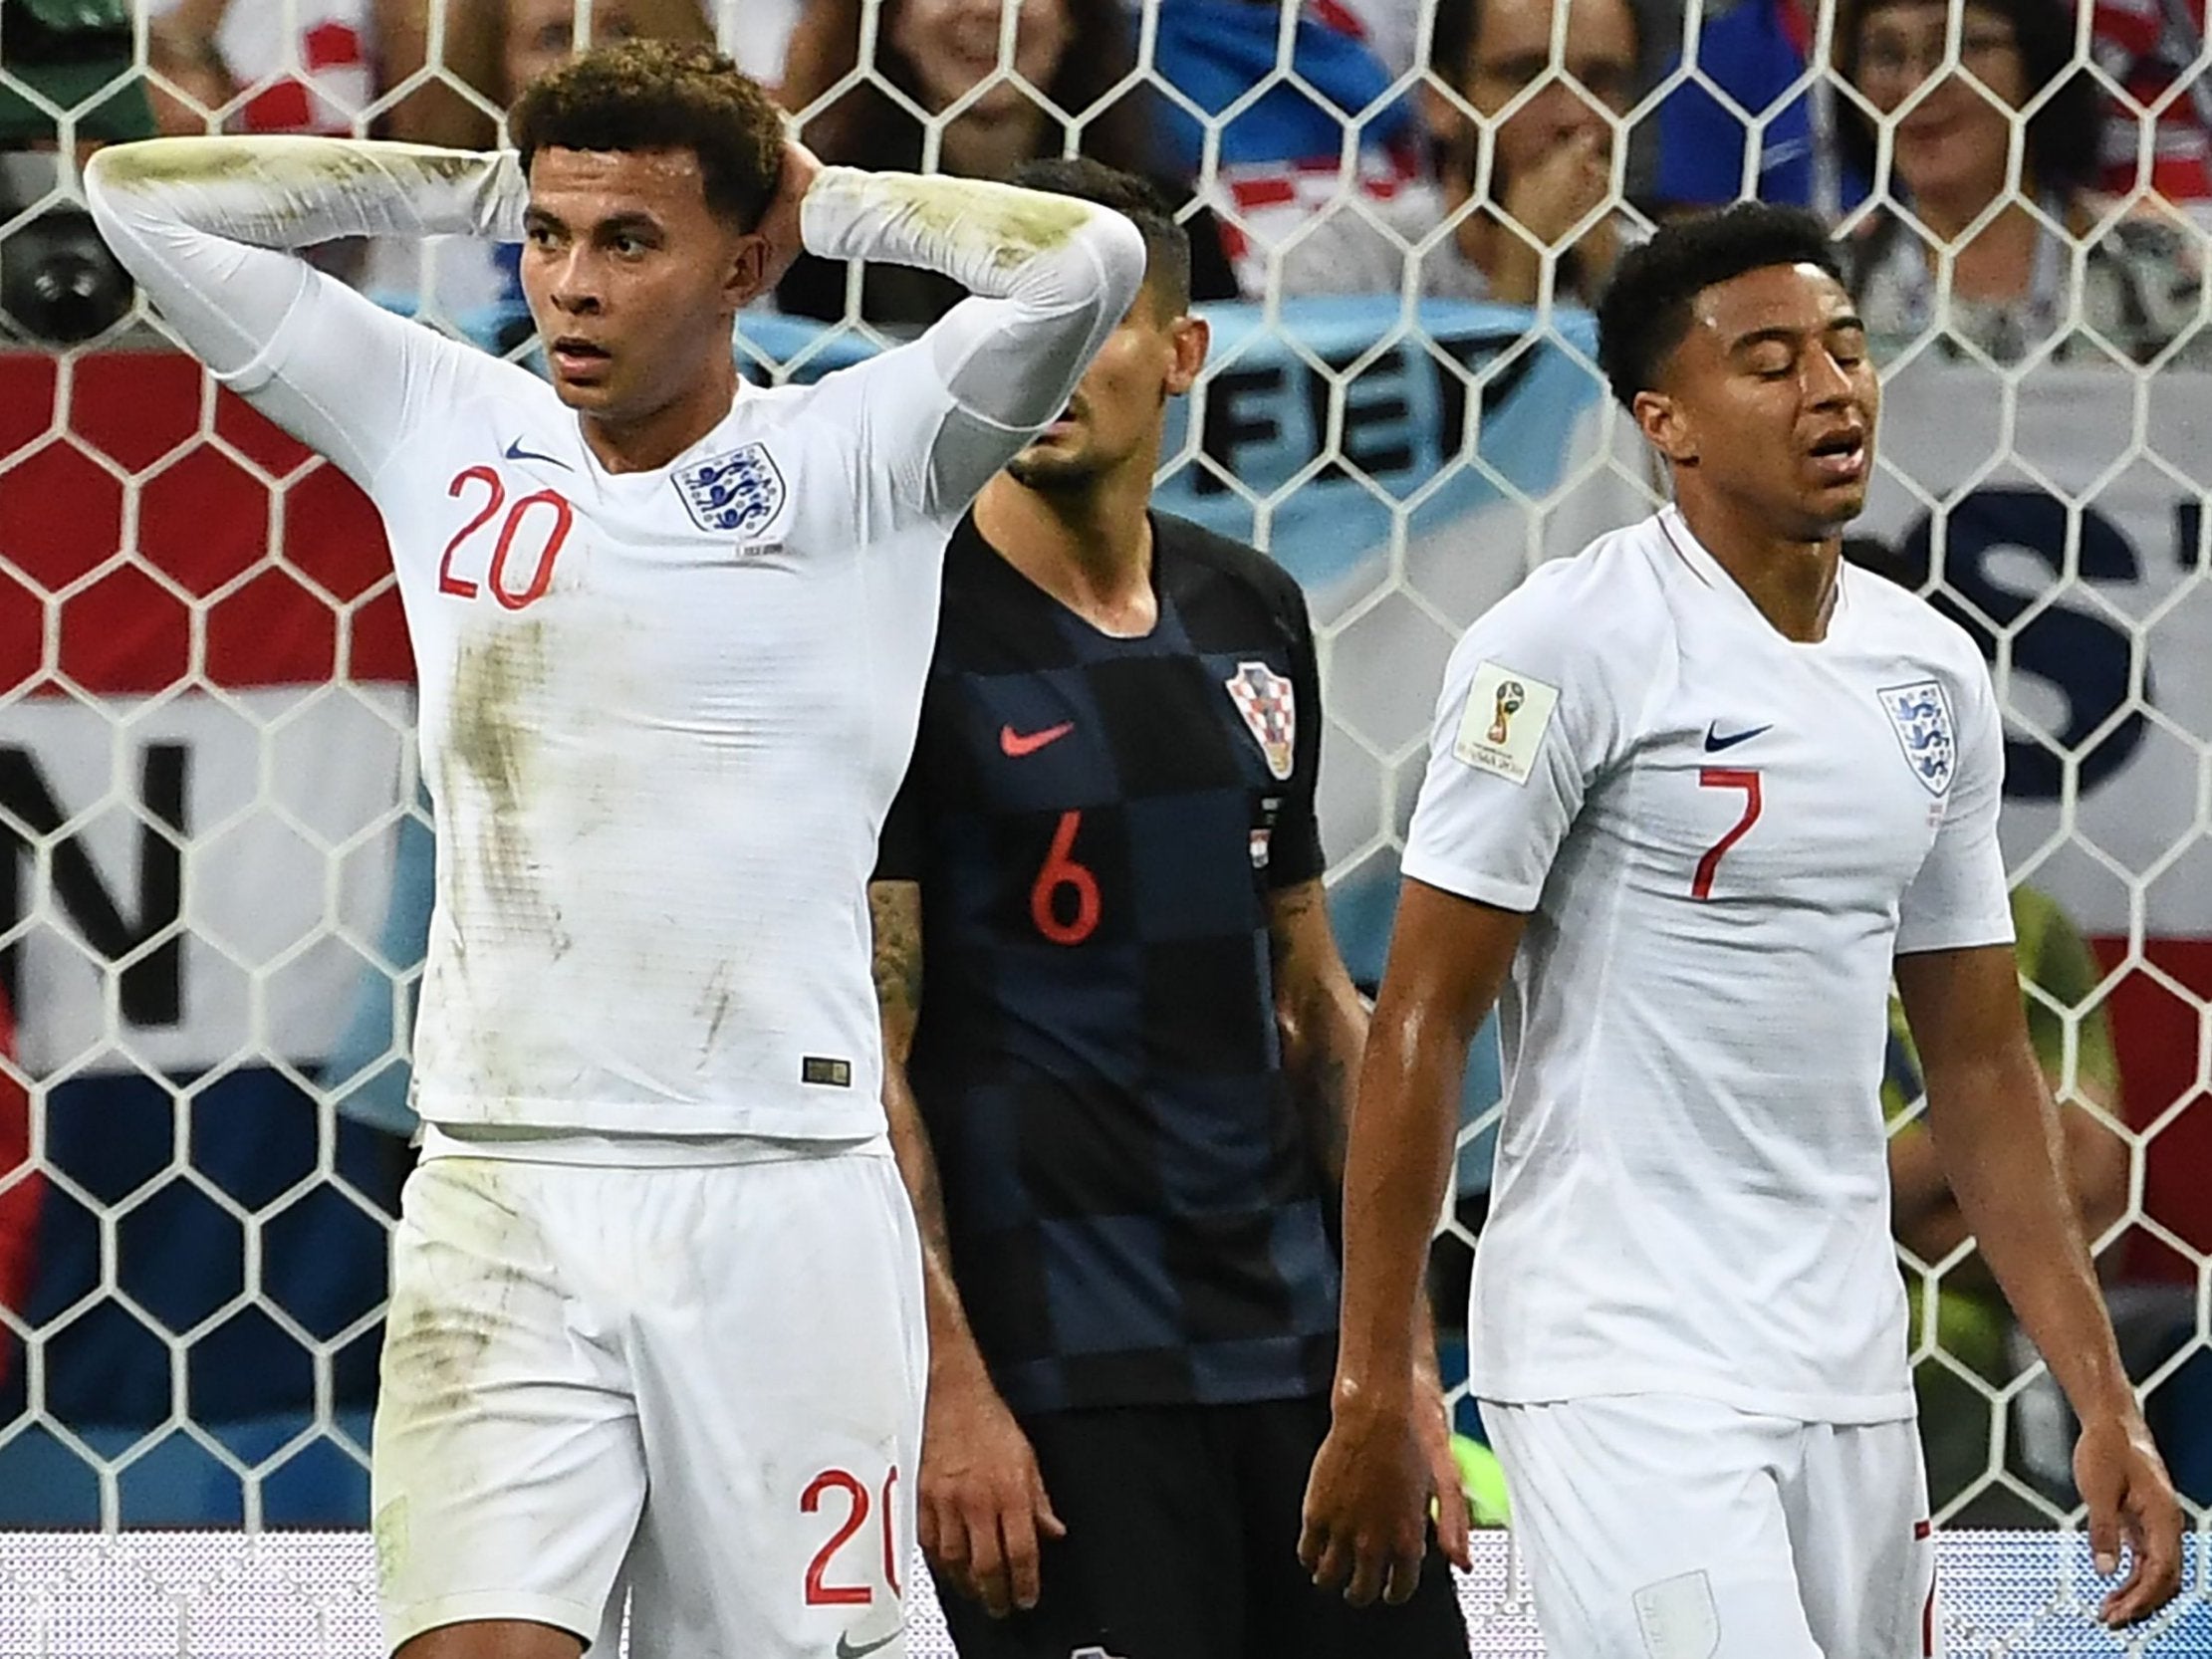 England lost the midfield battle and, in turn, the match